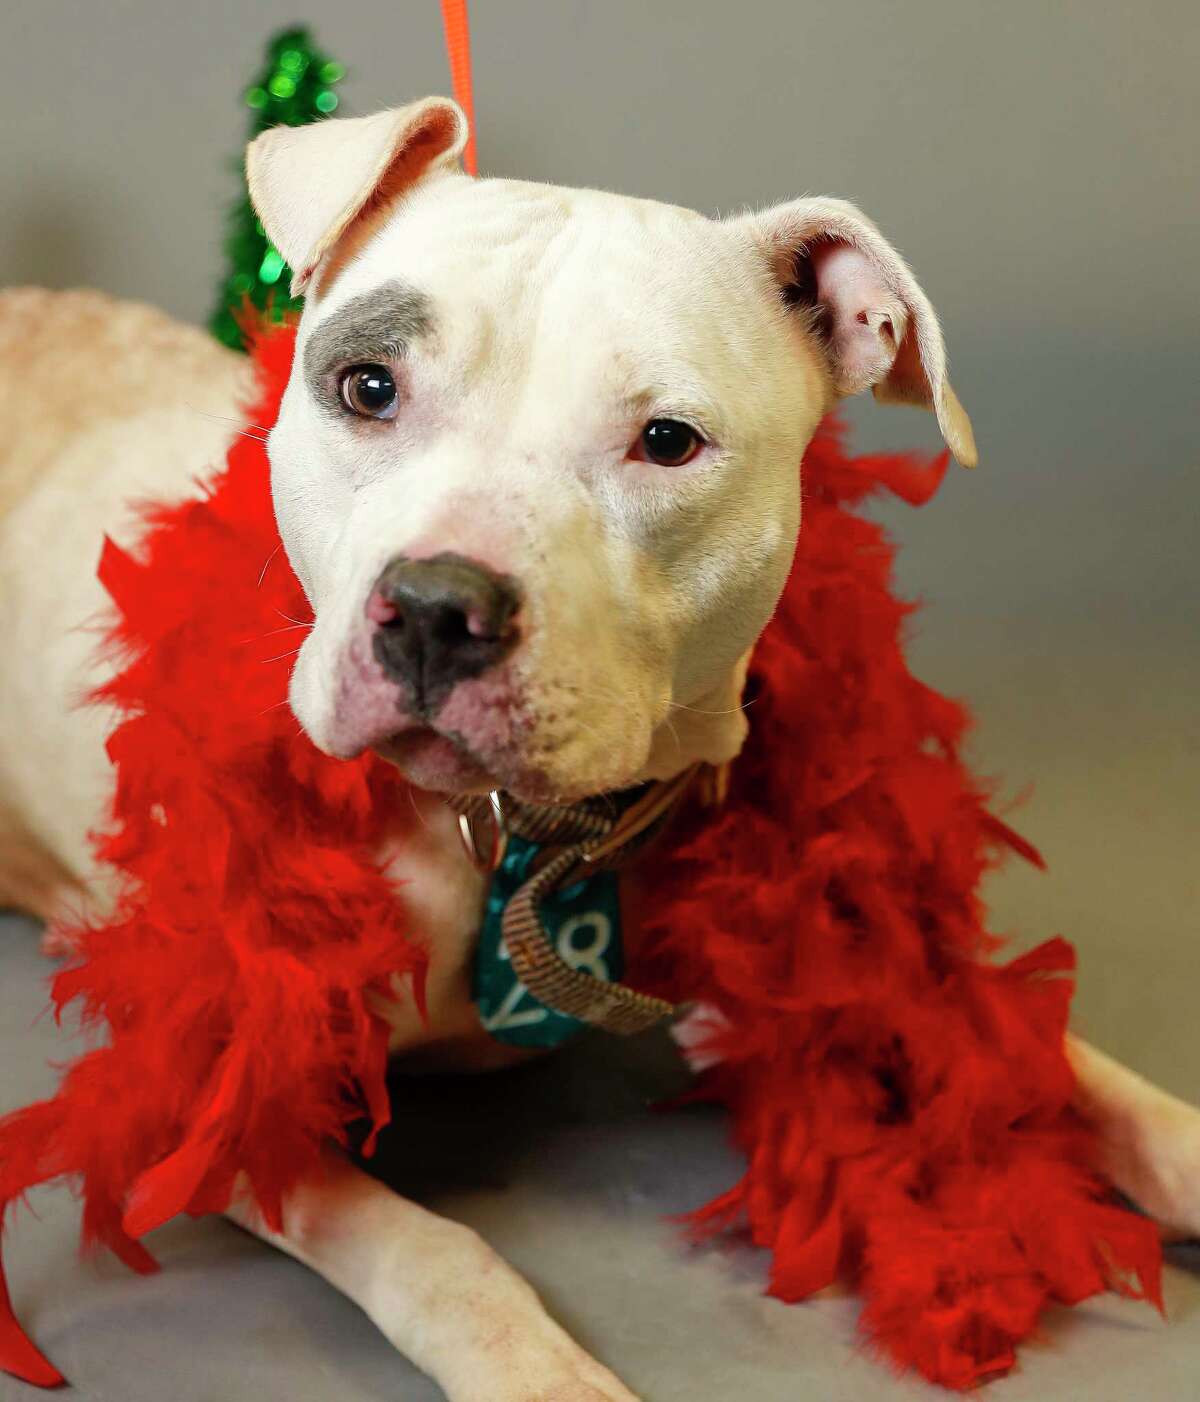 Layla (A547118) is a 3-year-old, female, white/blue Pit Bull mix available for adoption from the Harris County Animal Shelter. Photographed, Monday, Dec. 16, 2019, in Houston. Layla was brought into the shelter by a concerned citizen, who convinced his neighbor to surrender her, and another dog, because they were being neglected. Layla and her friend, Queen were not being cared or fed. Layla is very outgoing and sweet. Loves treats and attention.